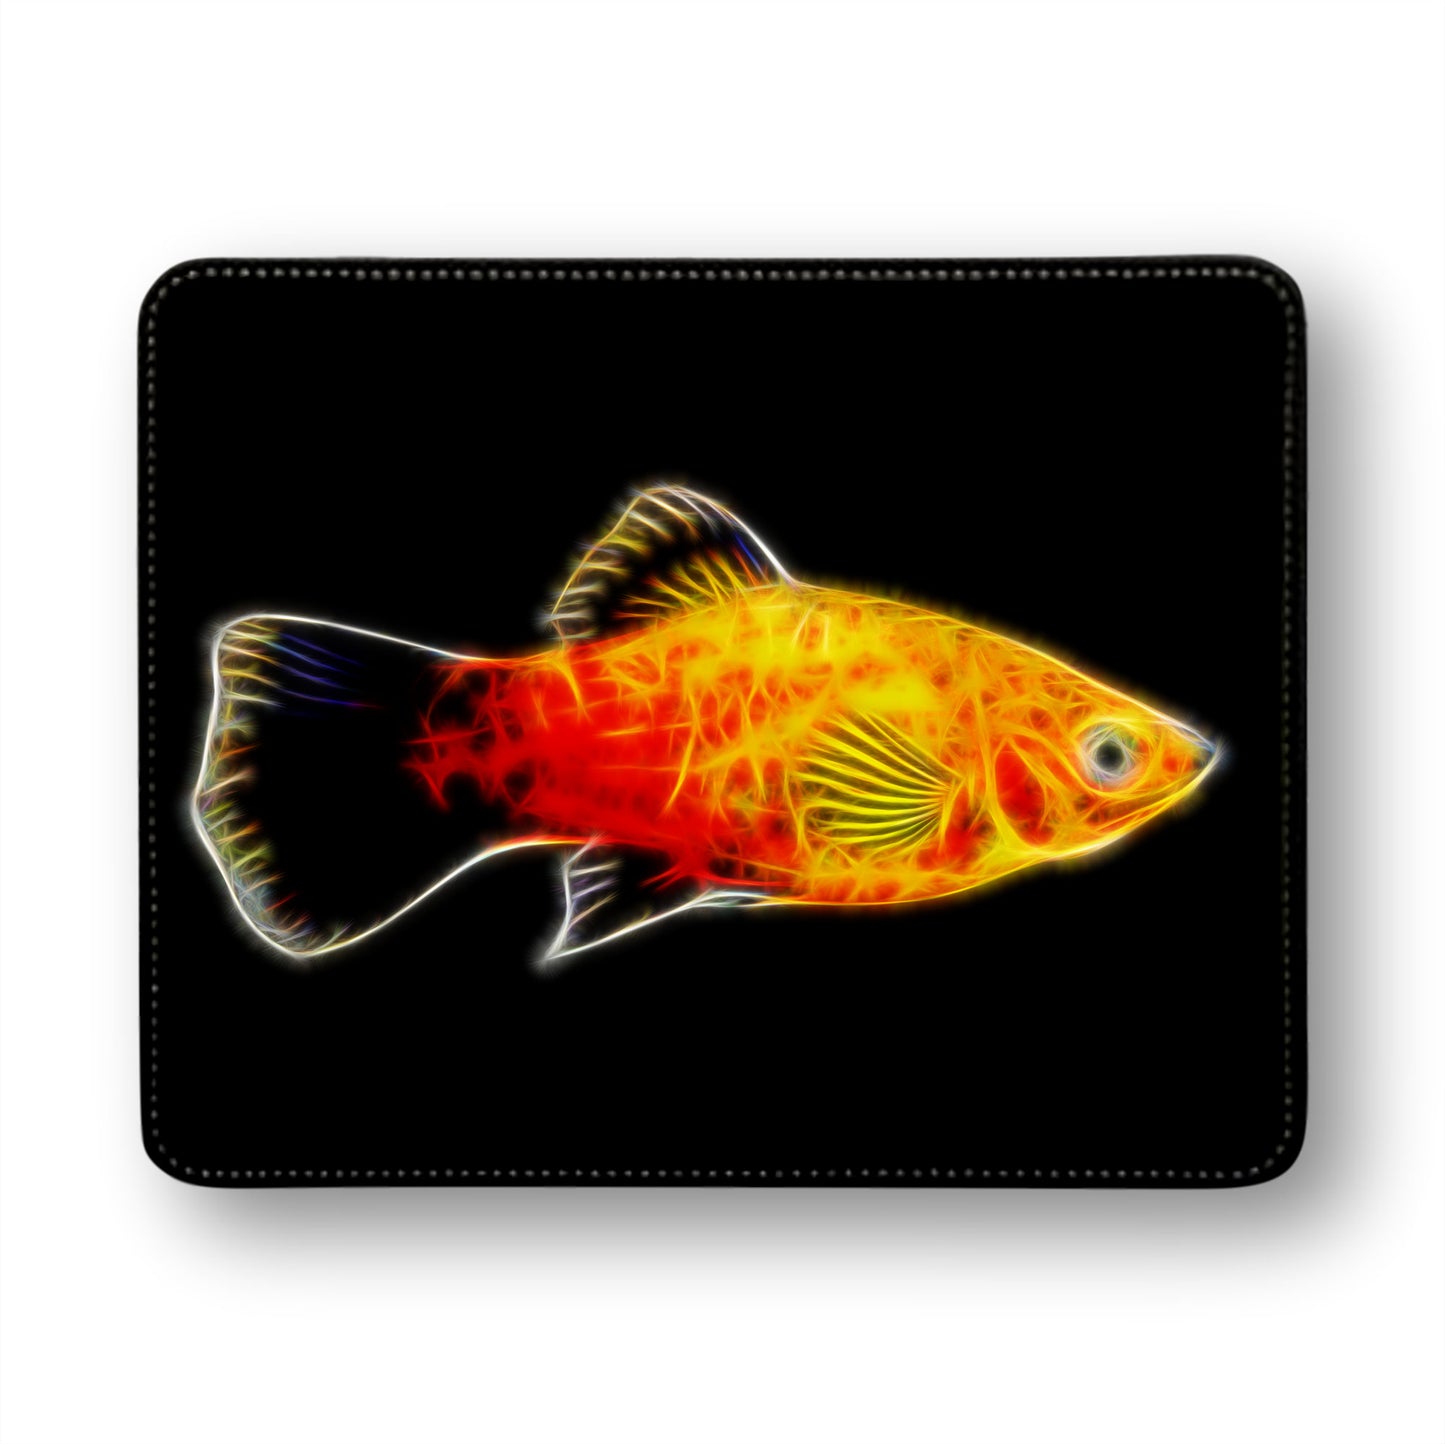 Sunburst Platy Fish Metal Wall Plaque with Stunning Fractal Art Design. Also available as Mouse Pad, Keychain or Coaster.